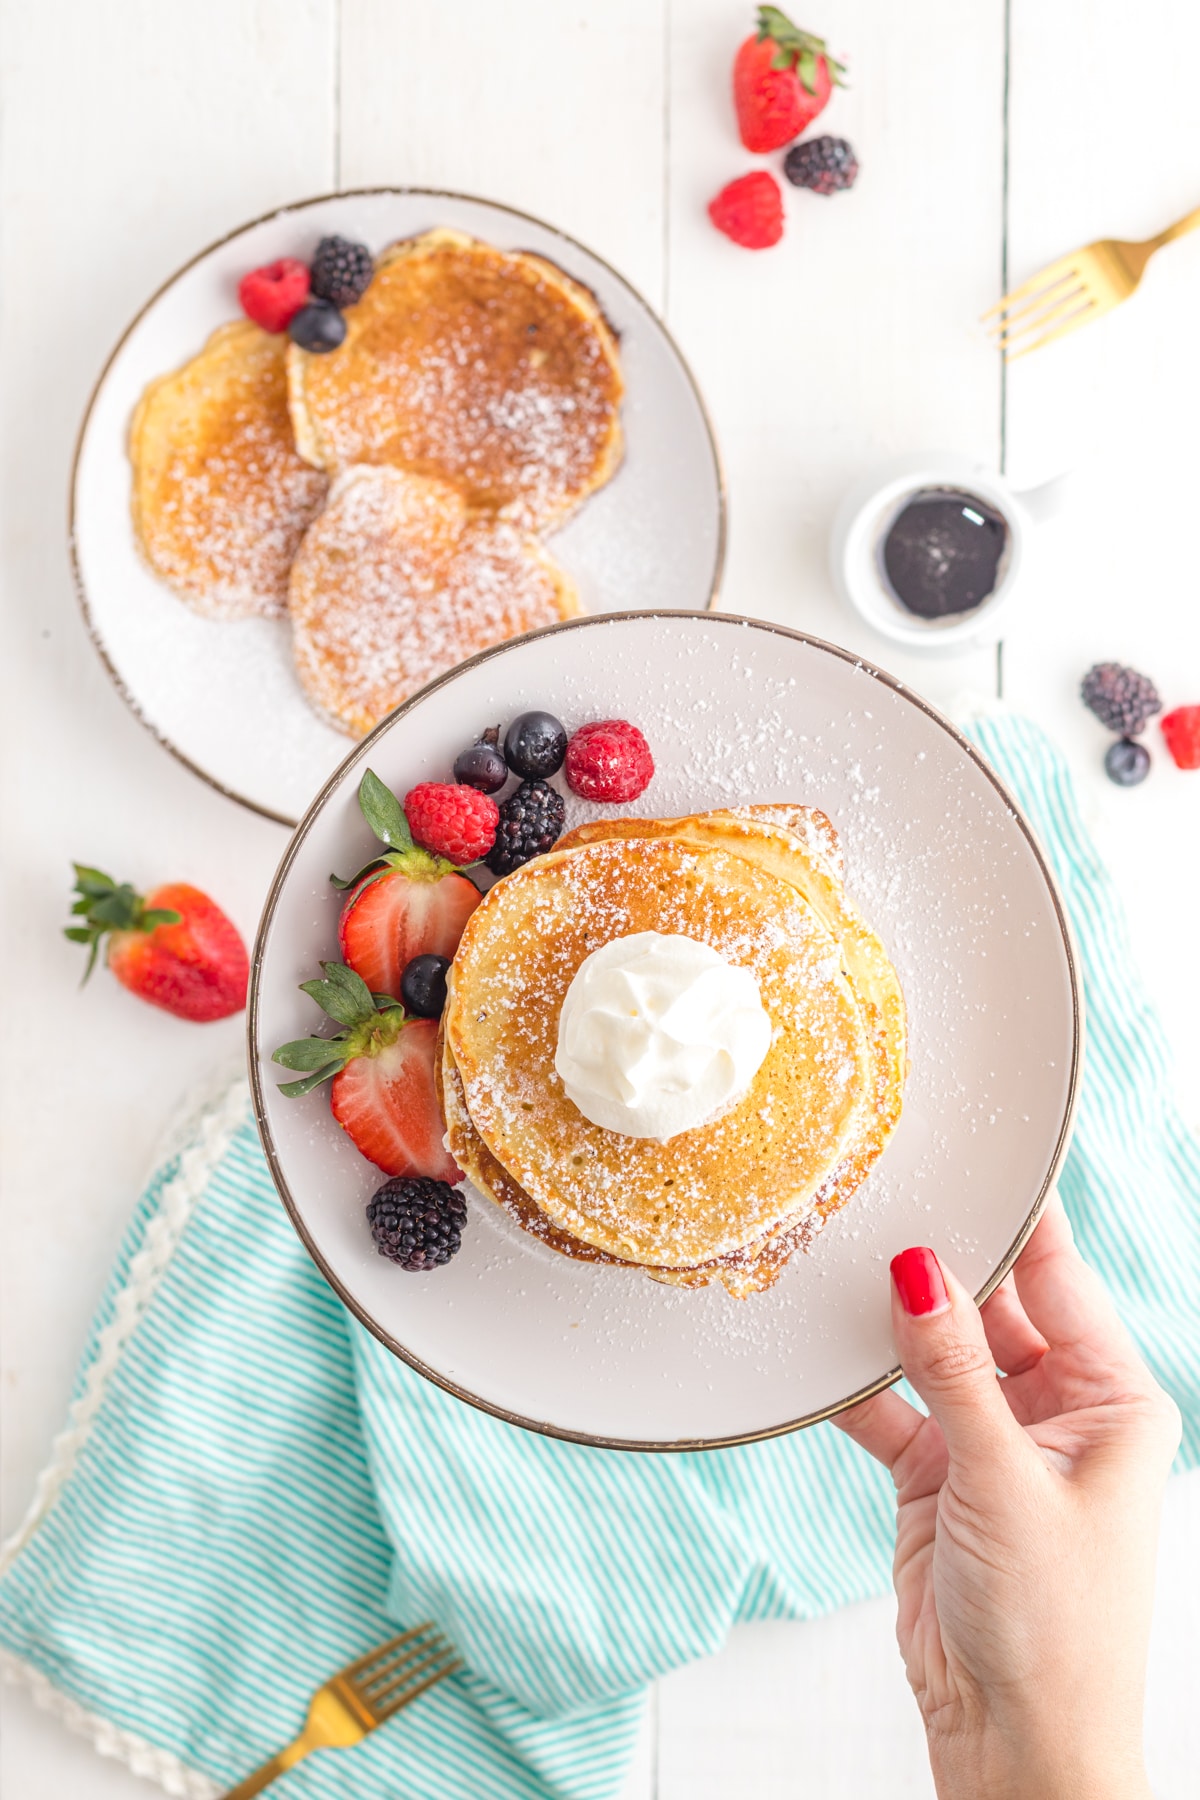 Hand holding plate of pancakes with berries.